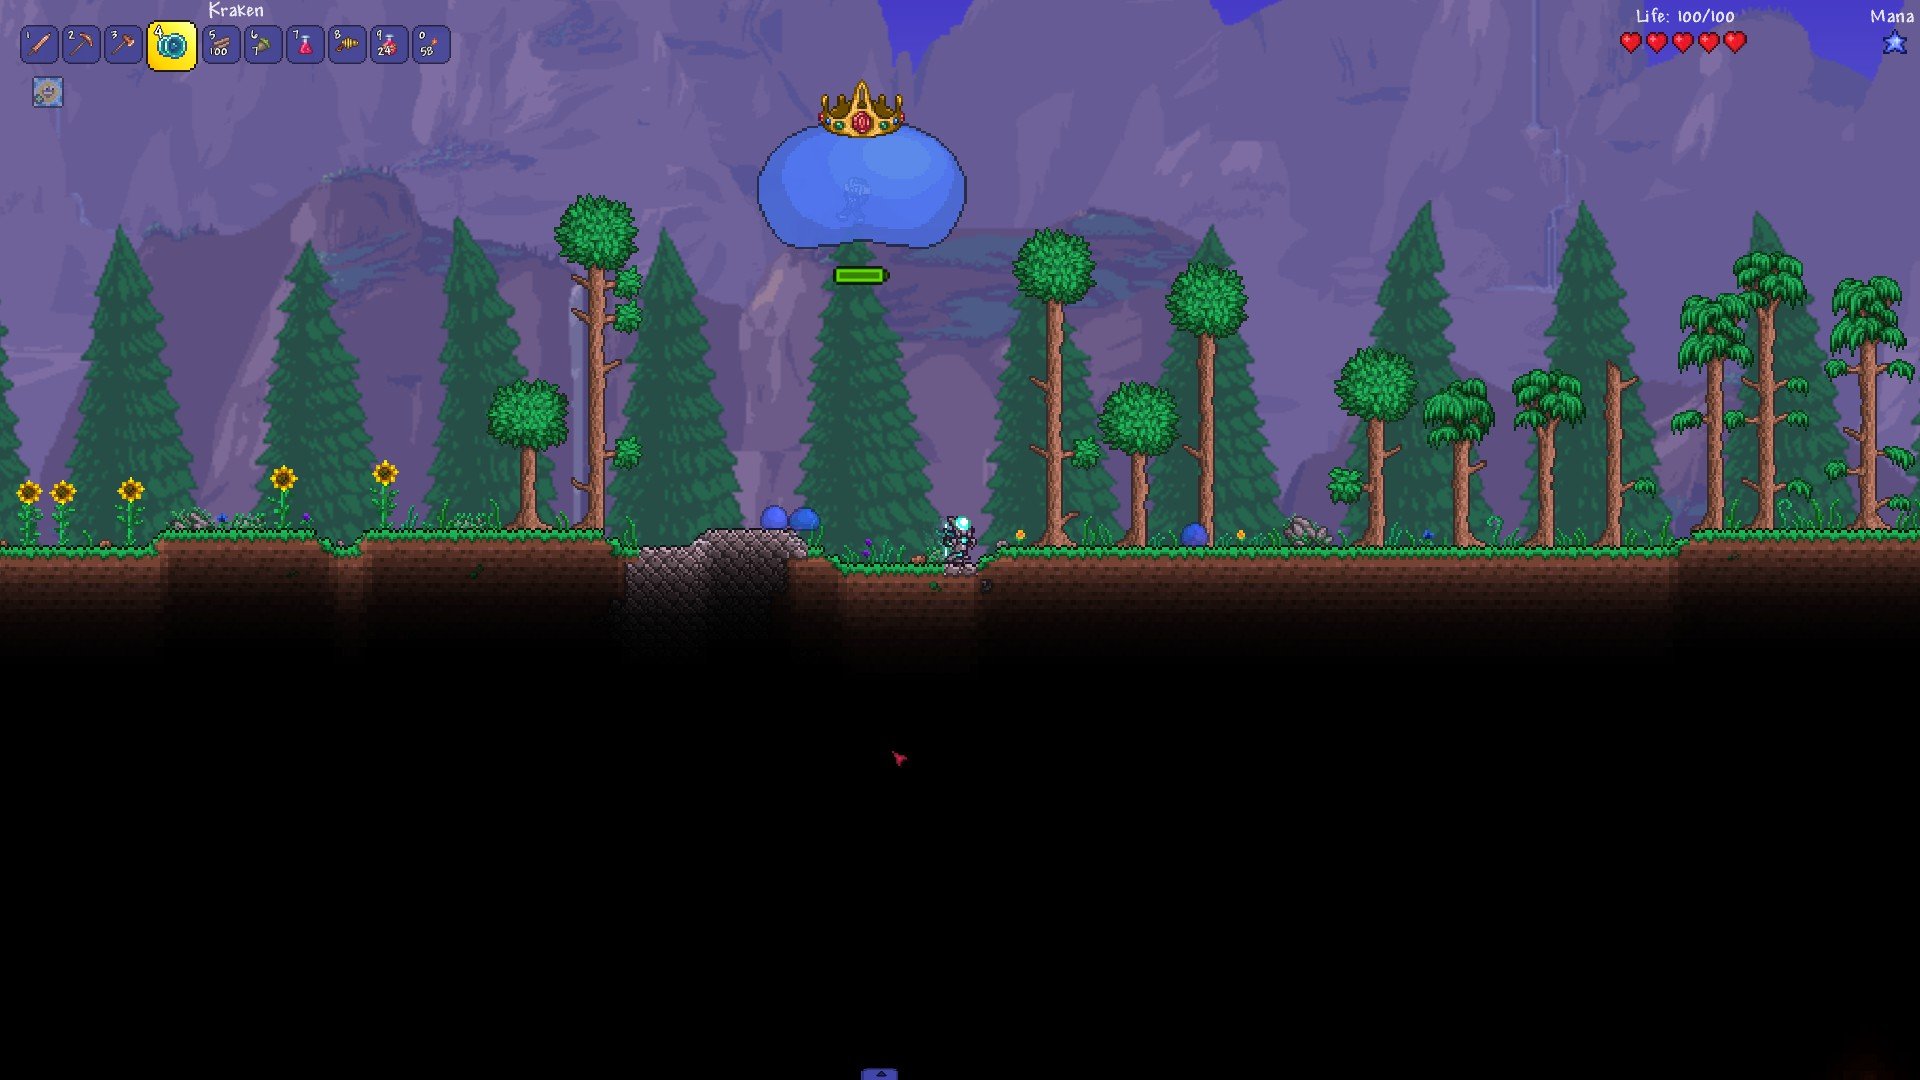 How to find and defeat King Slime in Terraria